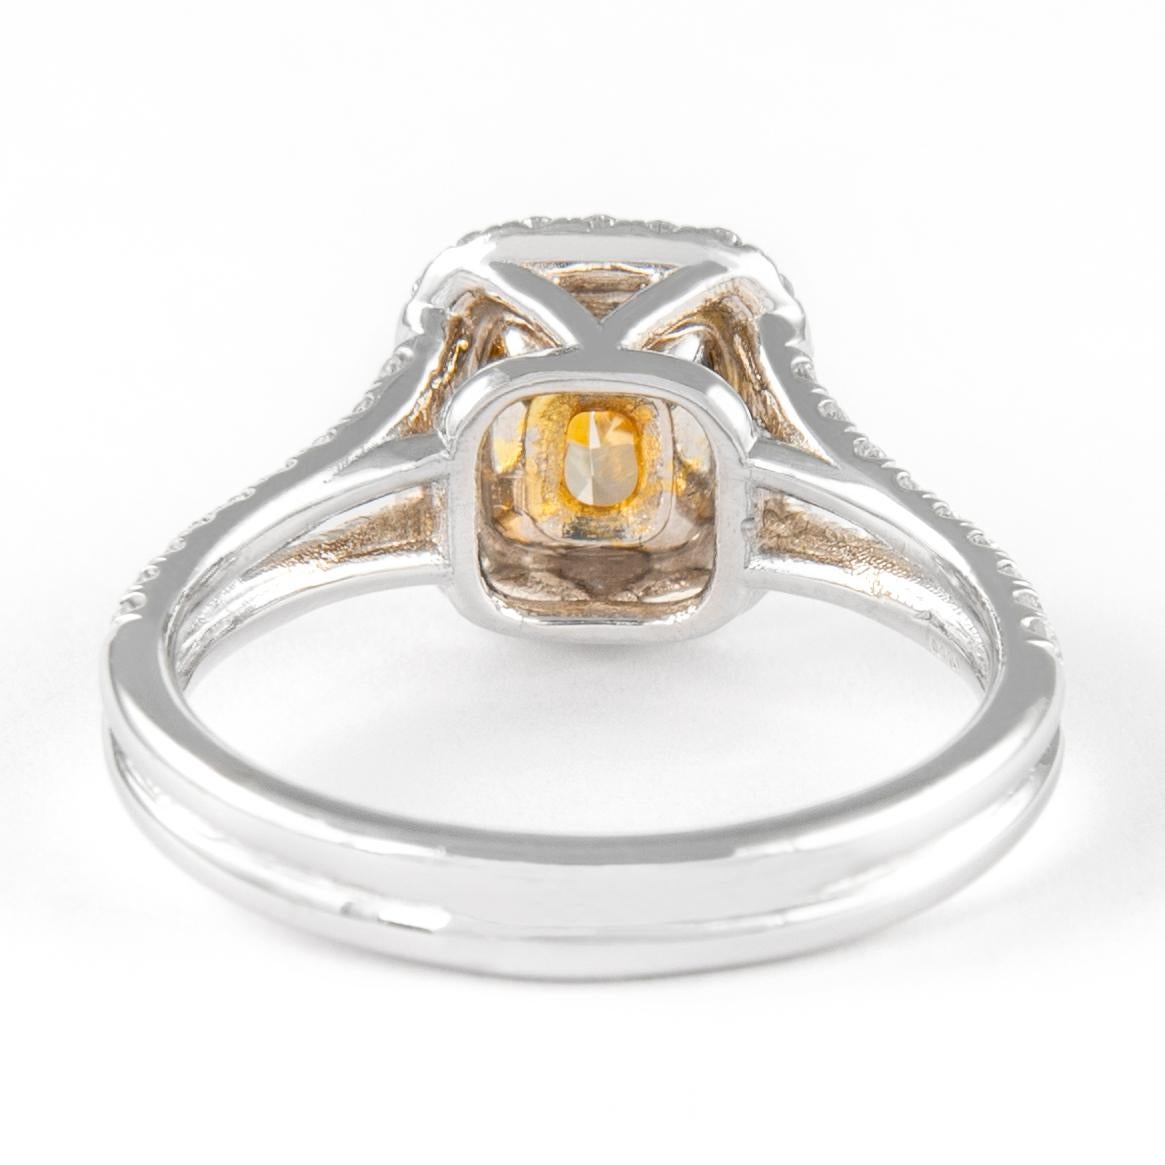 Alexander 1.00ct Fancy Intense Yellow Cushion Diamond with Halo Ring 18k In New Condition For Sale In BEVERLY HILLS, CA